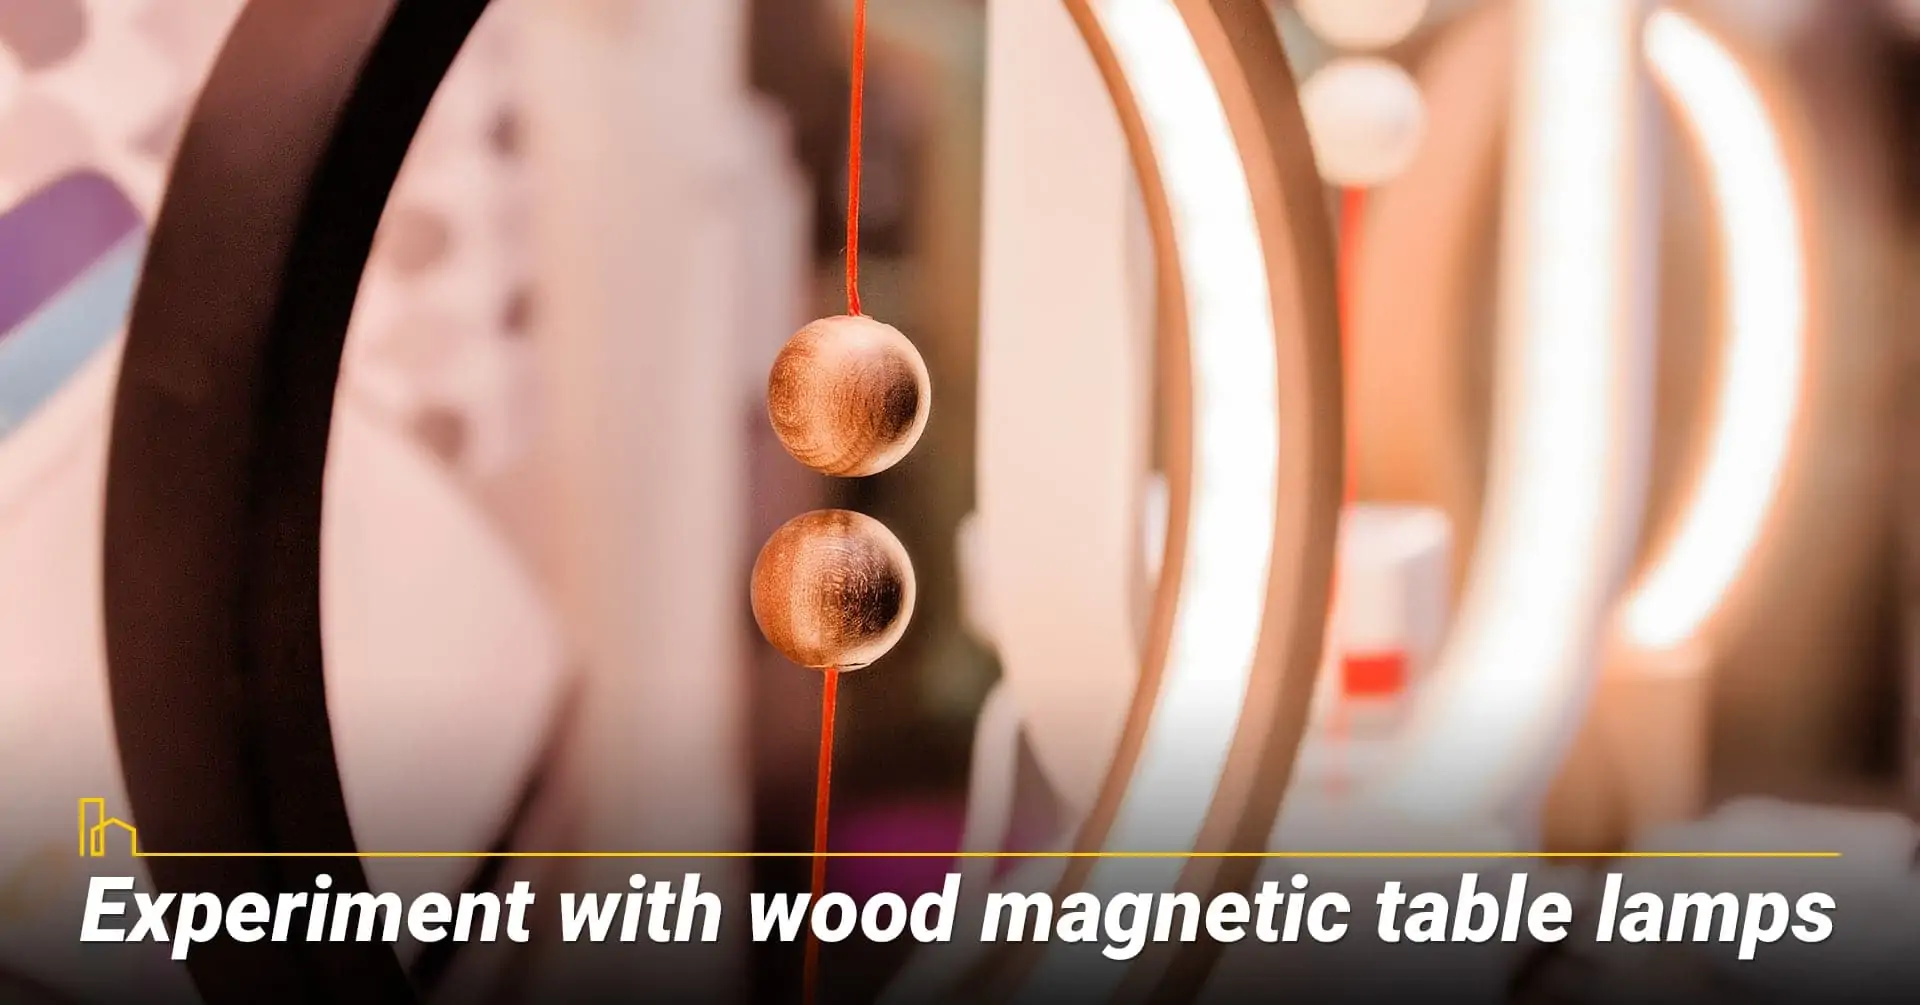 Experiment with wood magnetic table lamps, try different types of table lamps